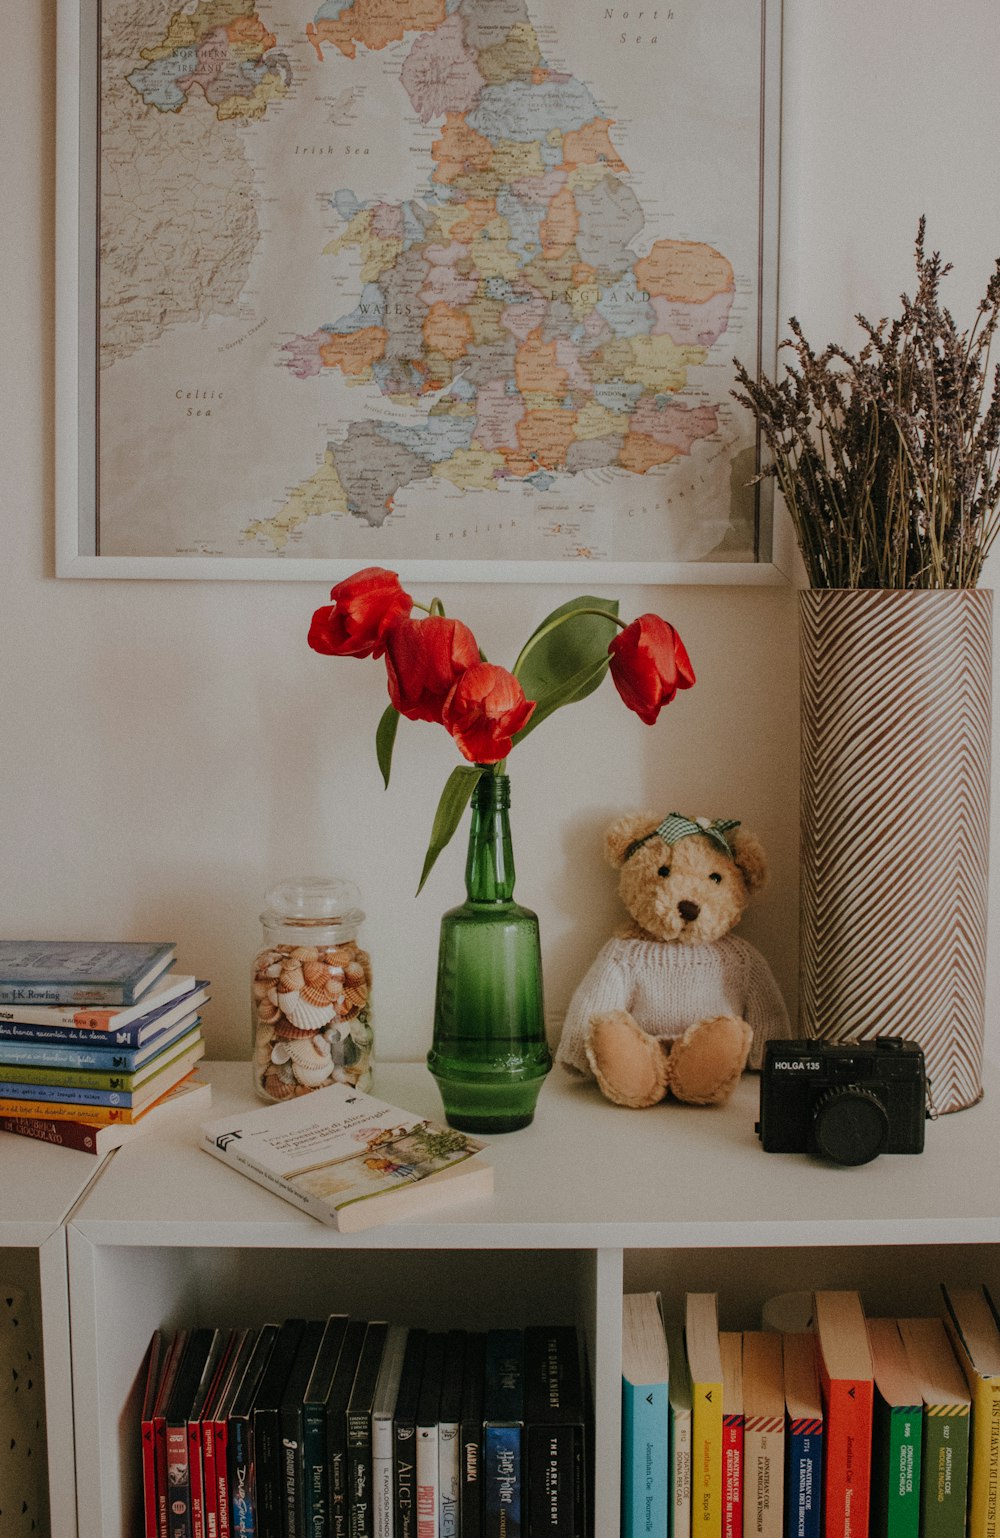 a teddy bear sitting on a book shelf next to a vase with flowers